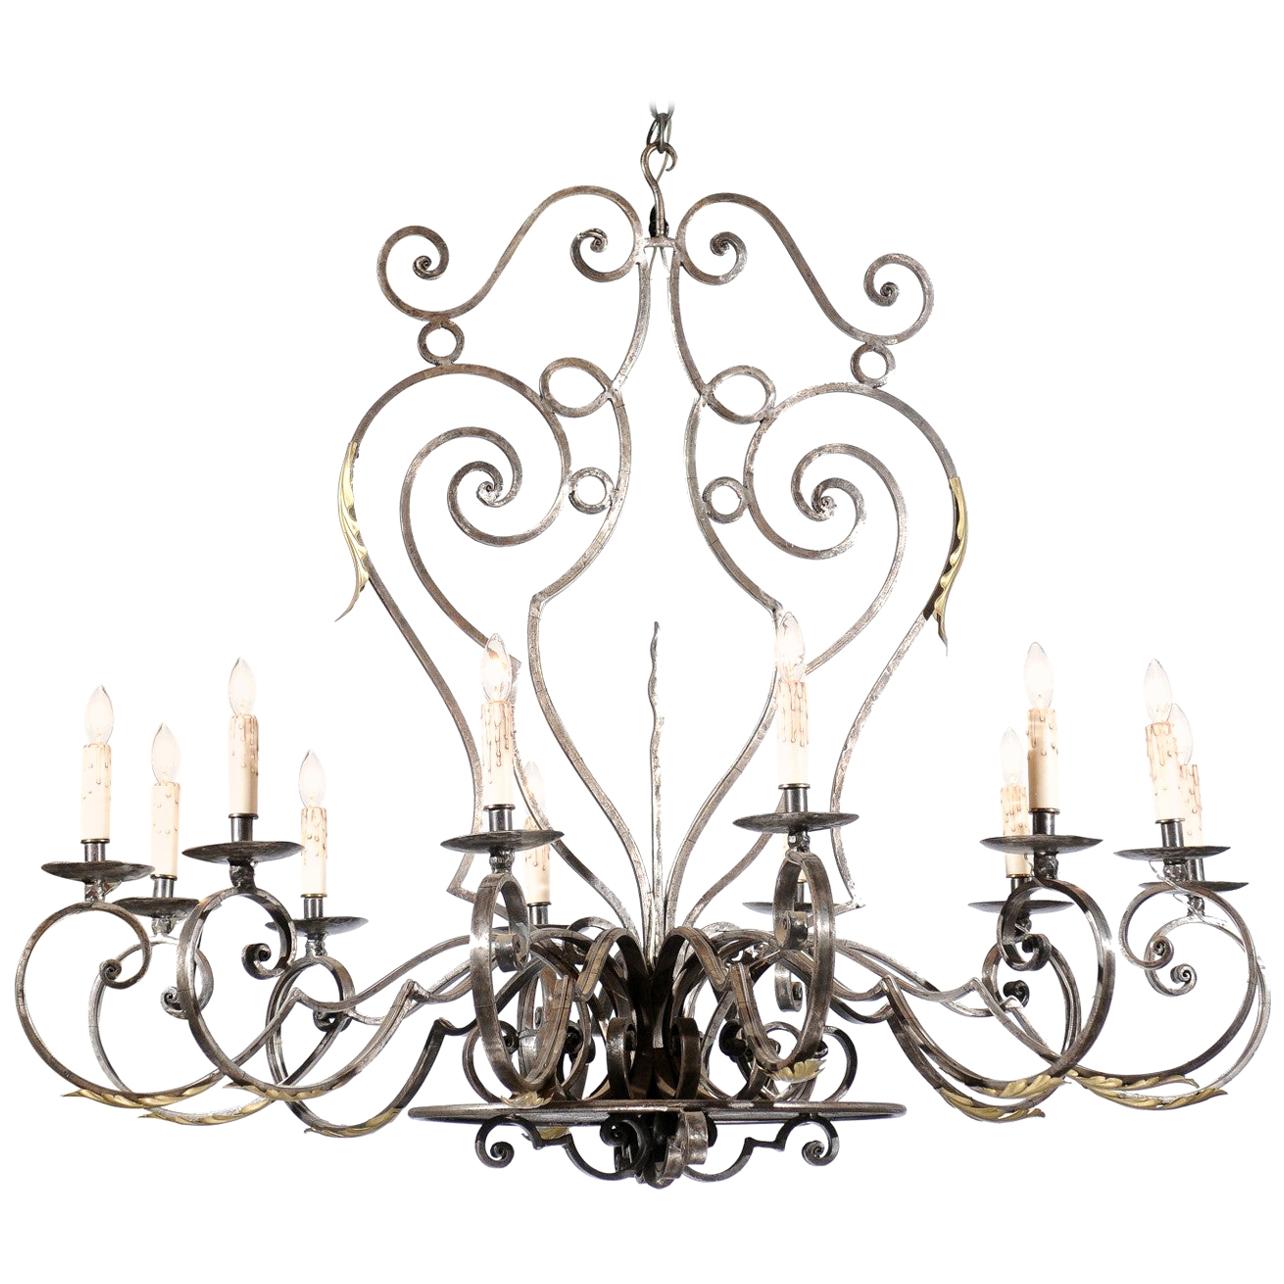 SOLD French Vintage 12-Light Wrought-Iron Chandelier with Scrolling Accents